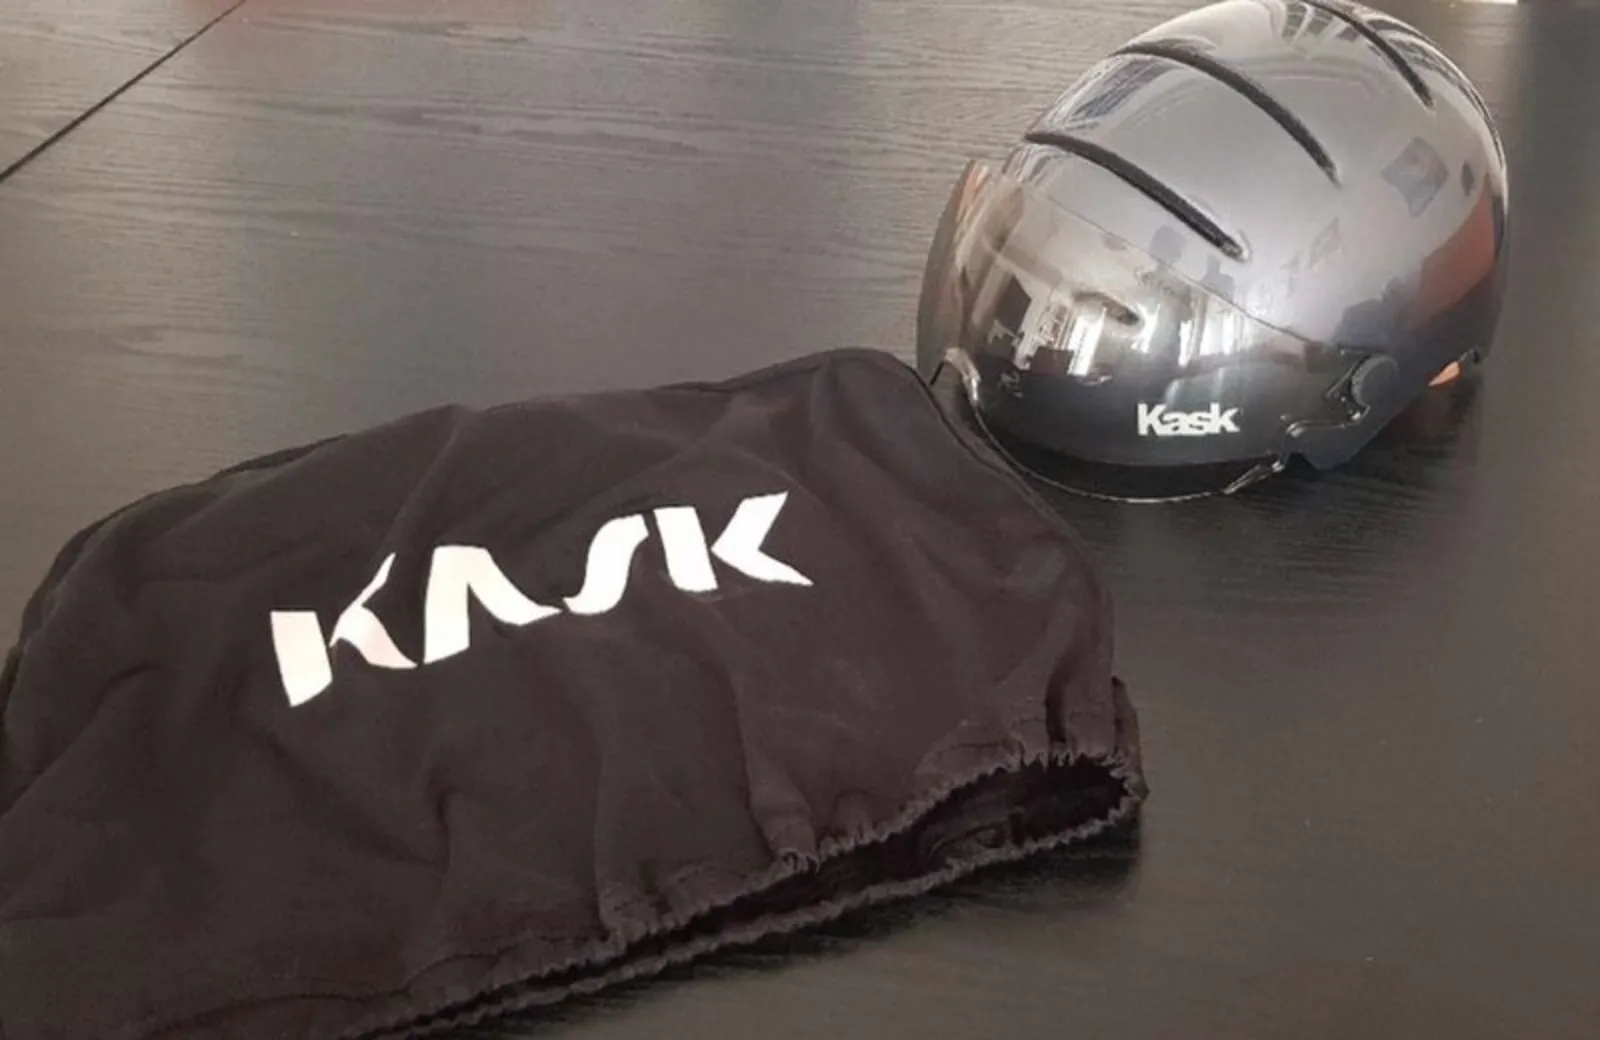 test-kask-lifestyle